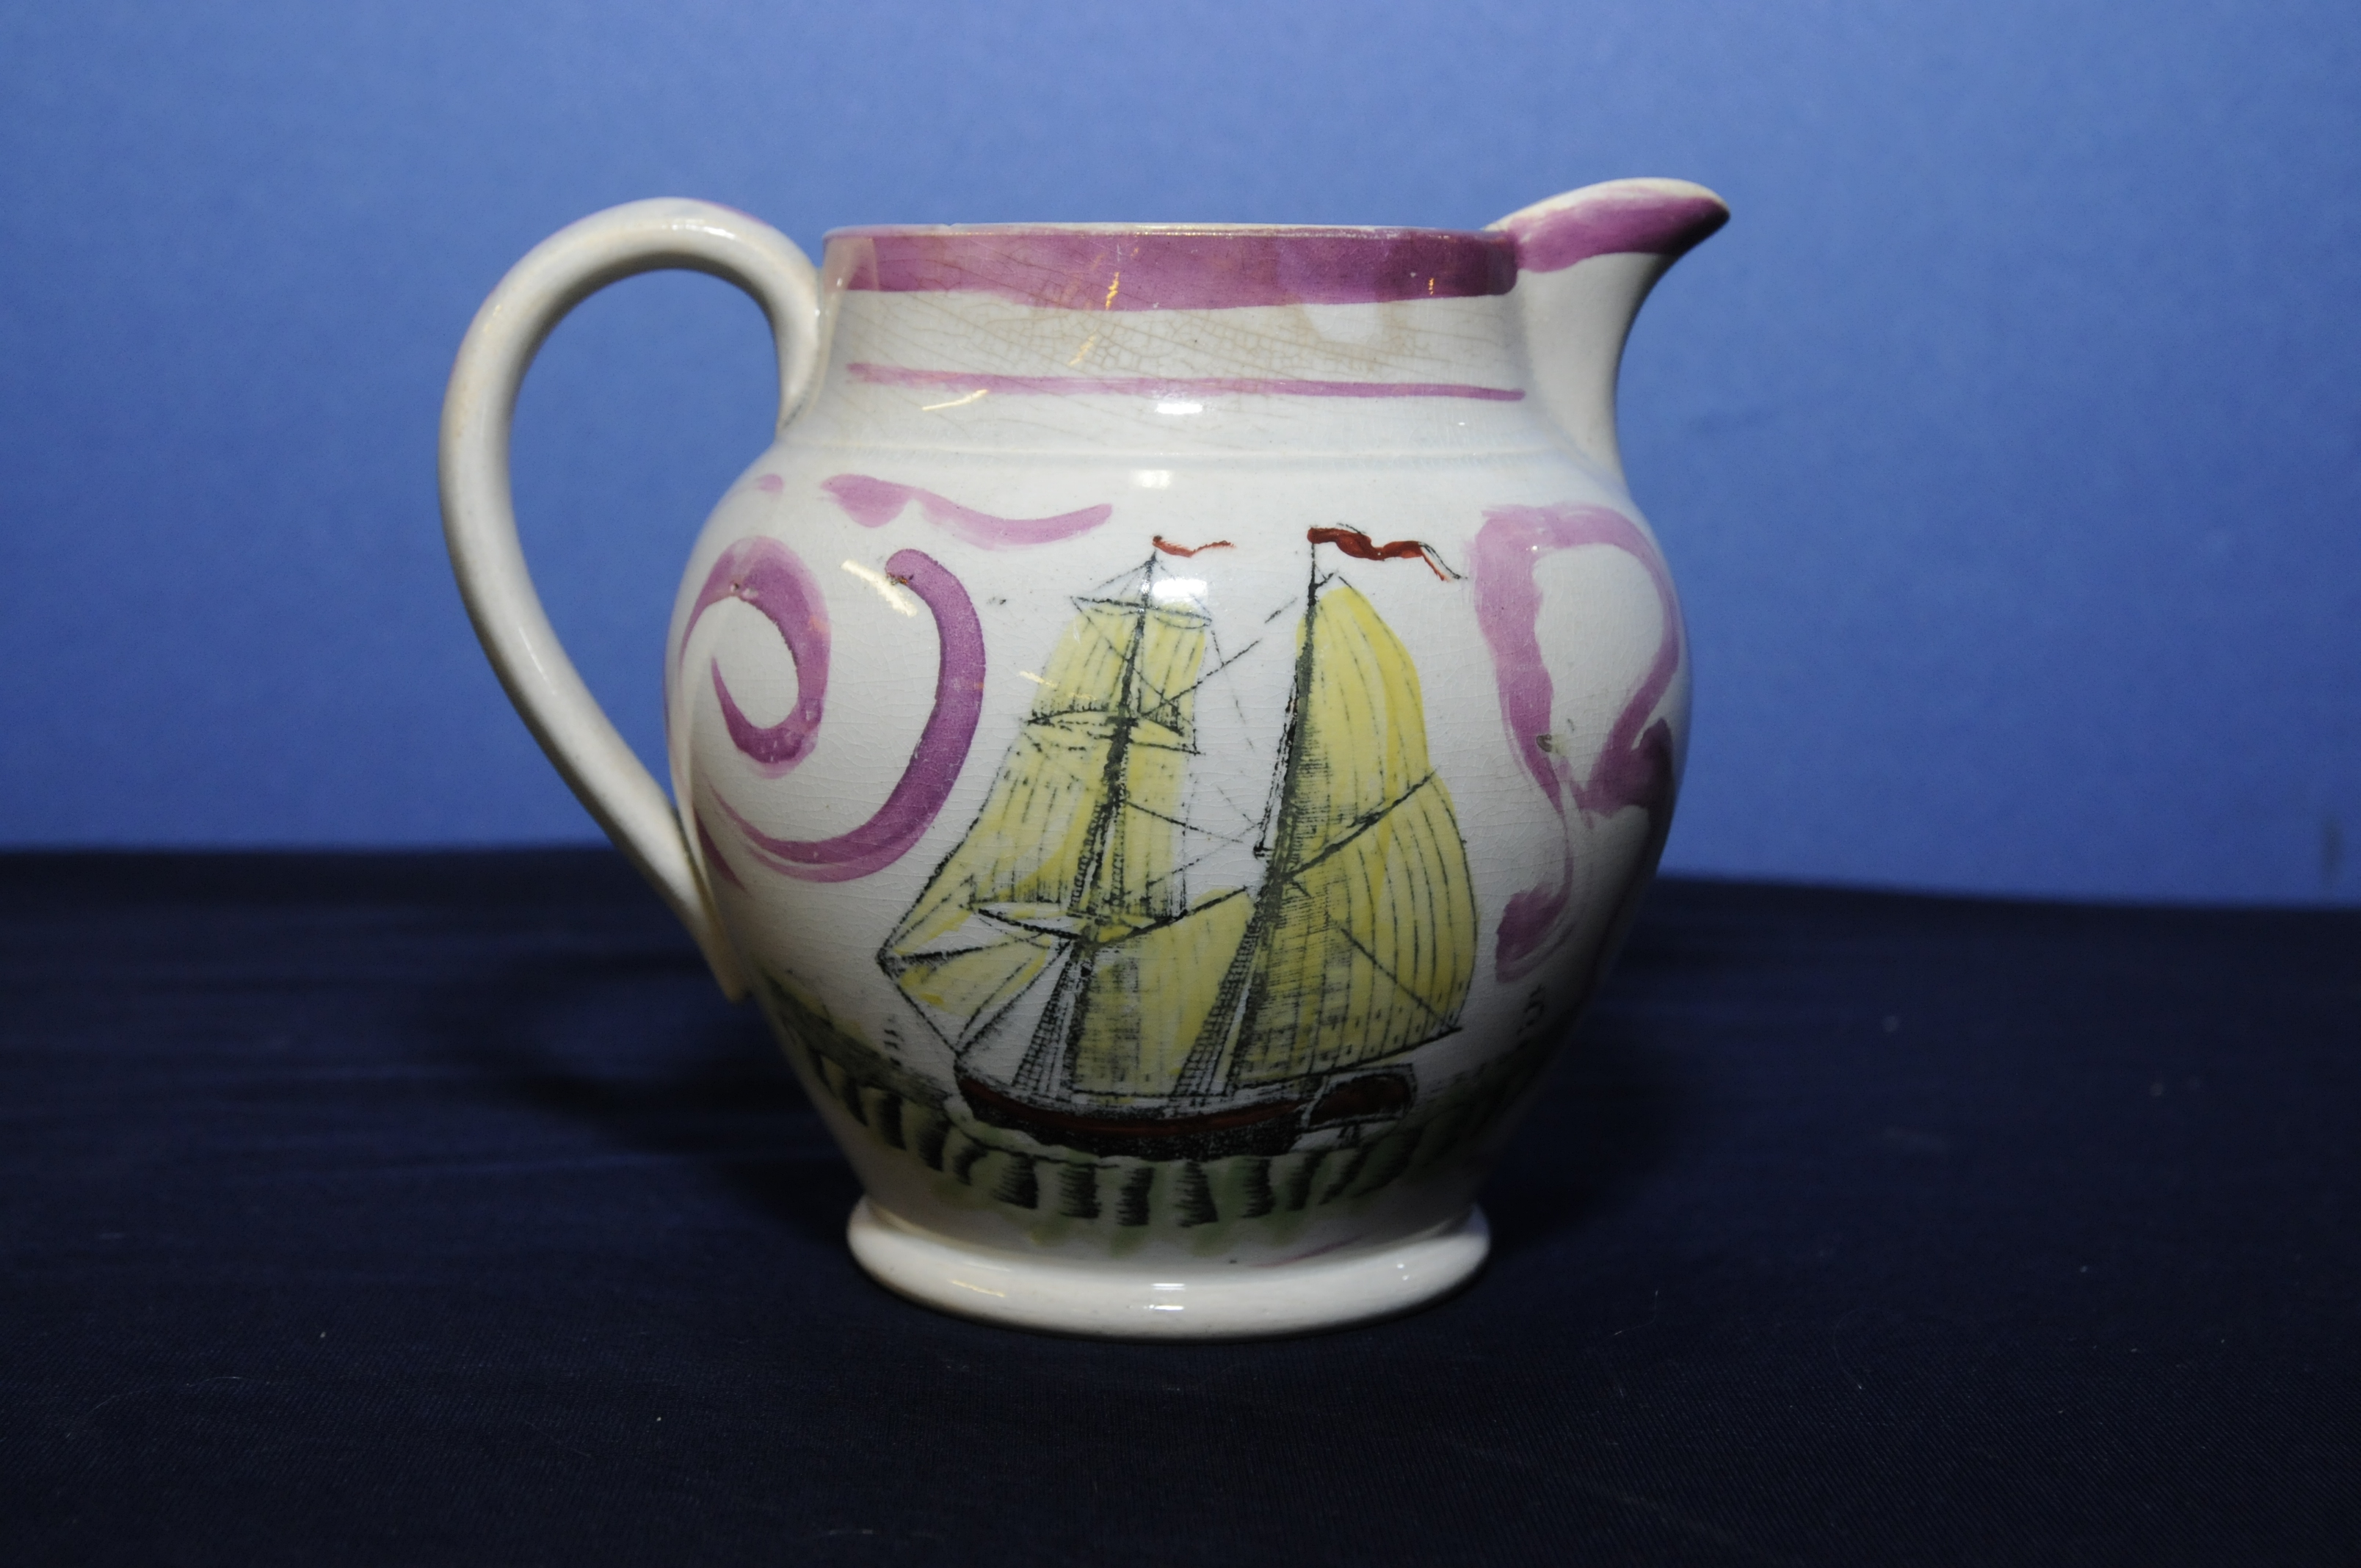 19th C Sunderland lustre jug (12cm high) with shipping scene and seafaring ditty (small chip to - Image 2 of 2